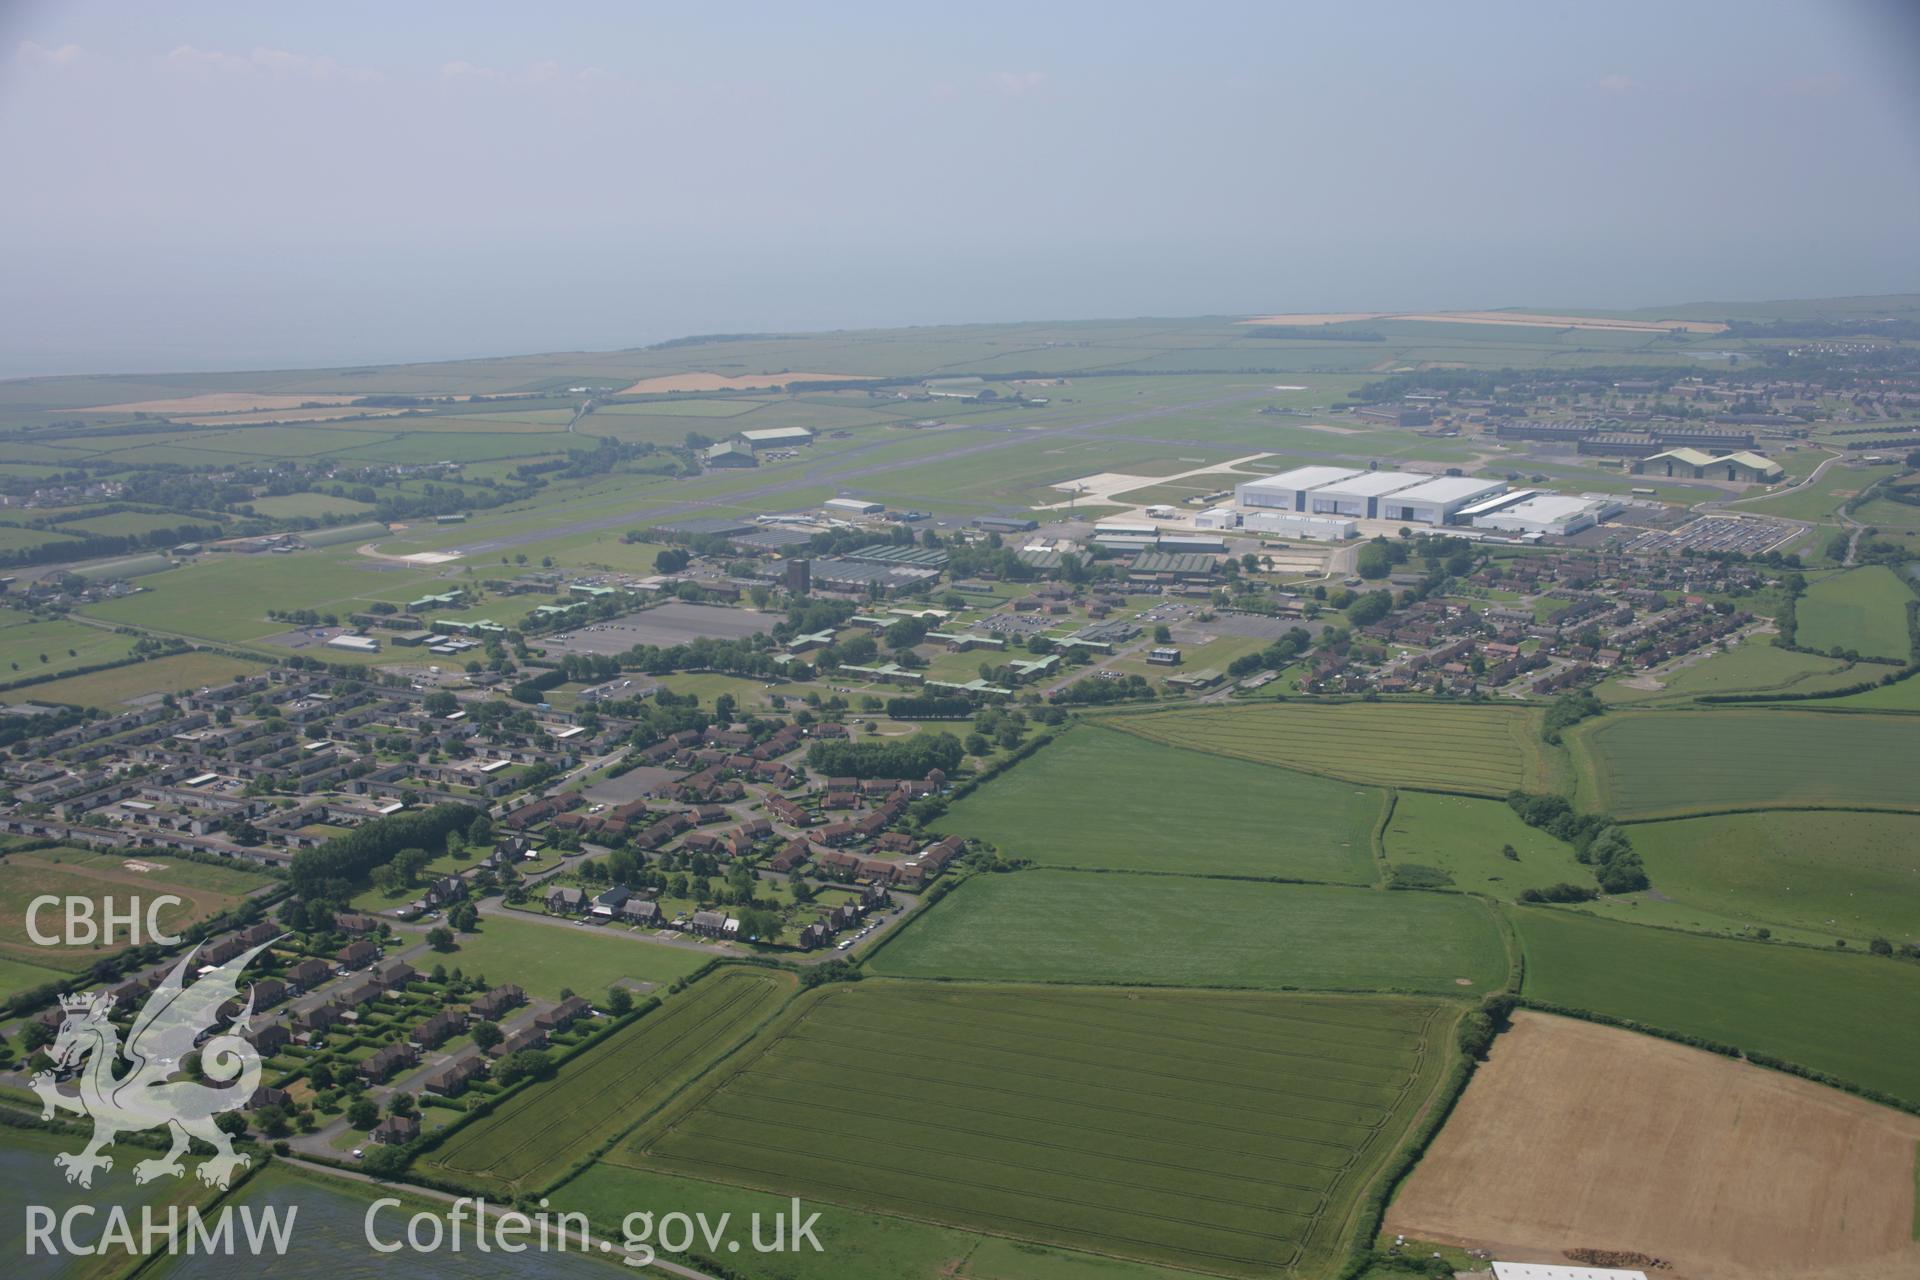 RCAHMW colour oblique photograph of RAF St Athan. Taken by Toby Driver on 29/06/2006.